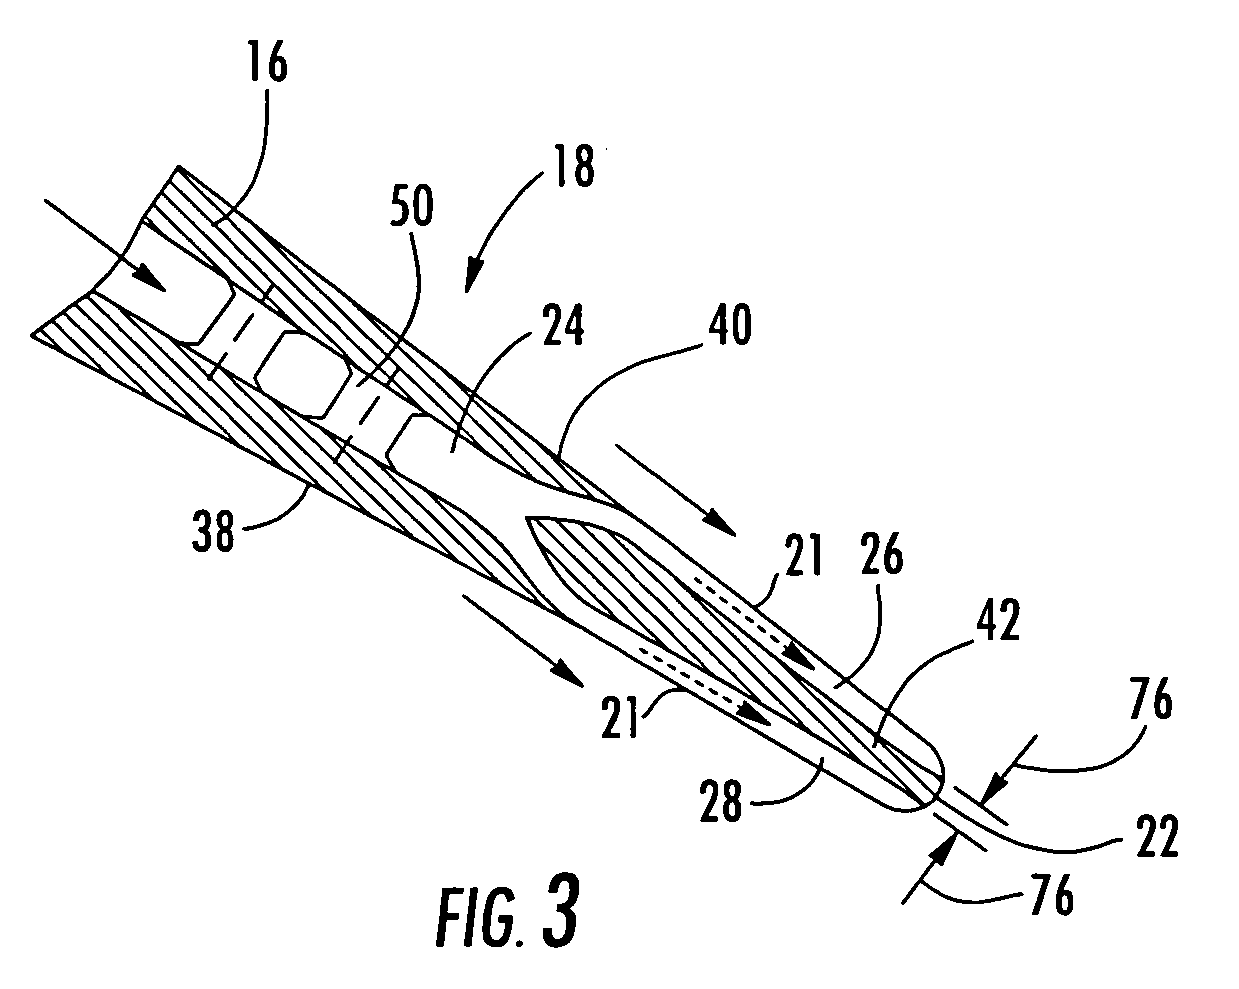 Turbine airfoil cooling system with bifurcated and recessed trailing edge exhaust channels